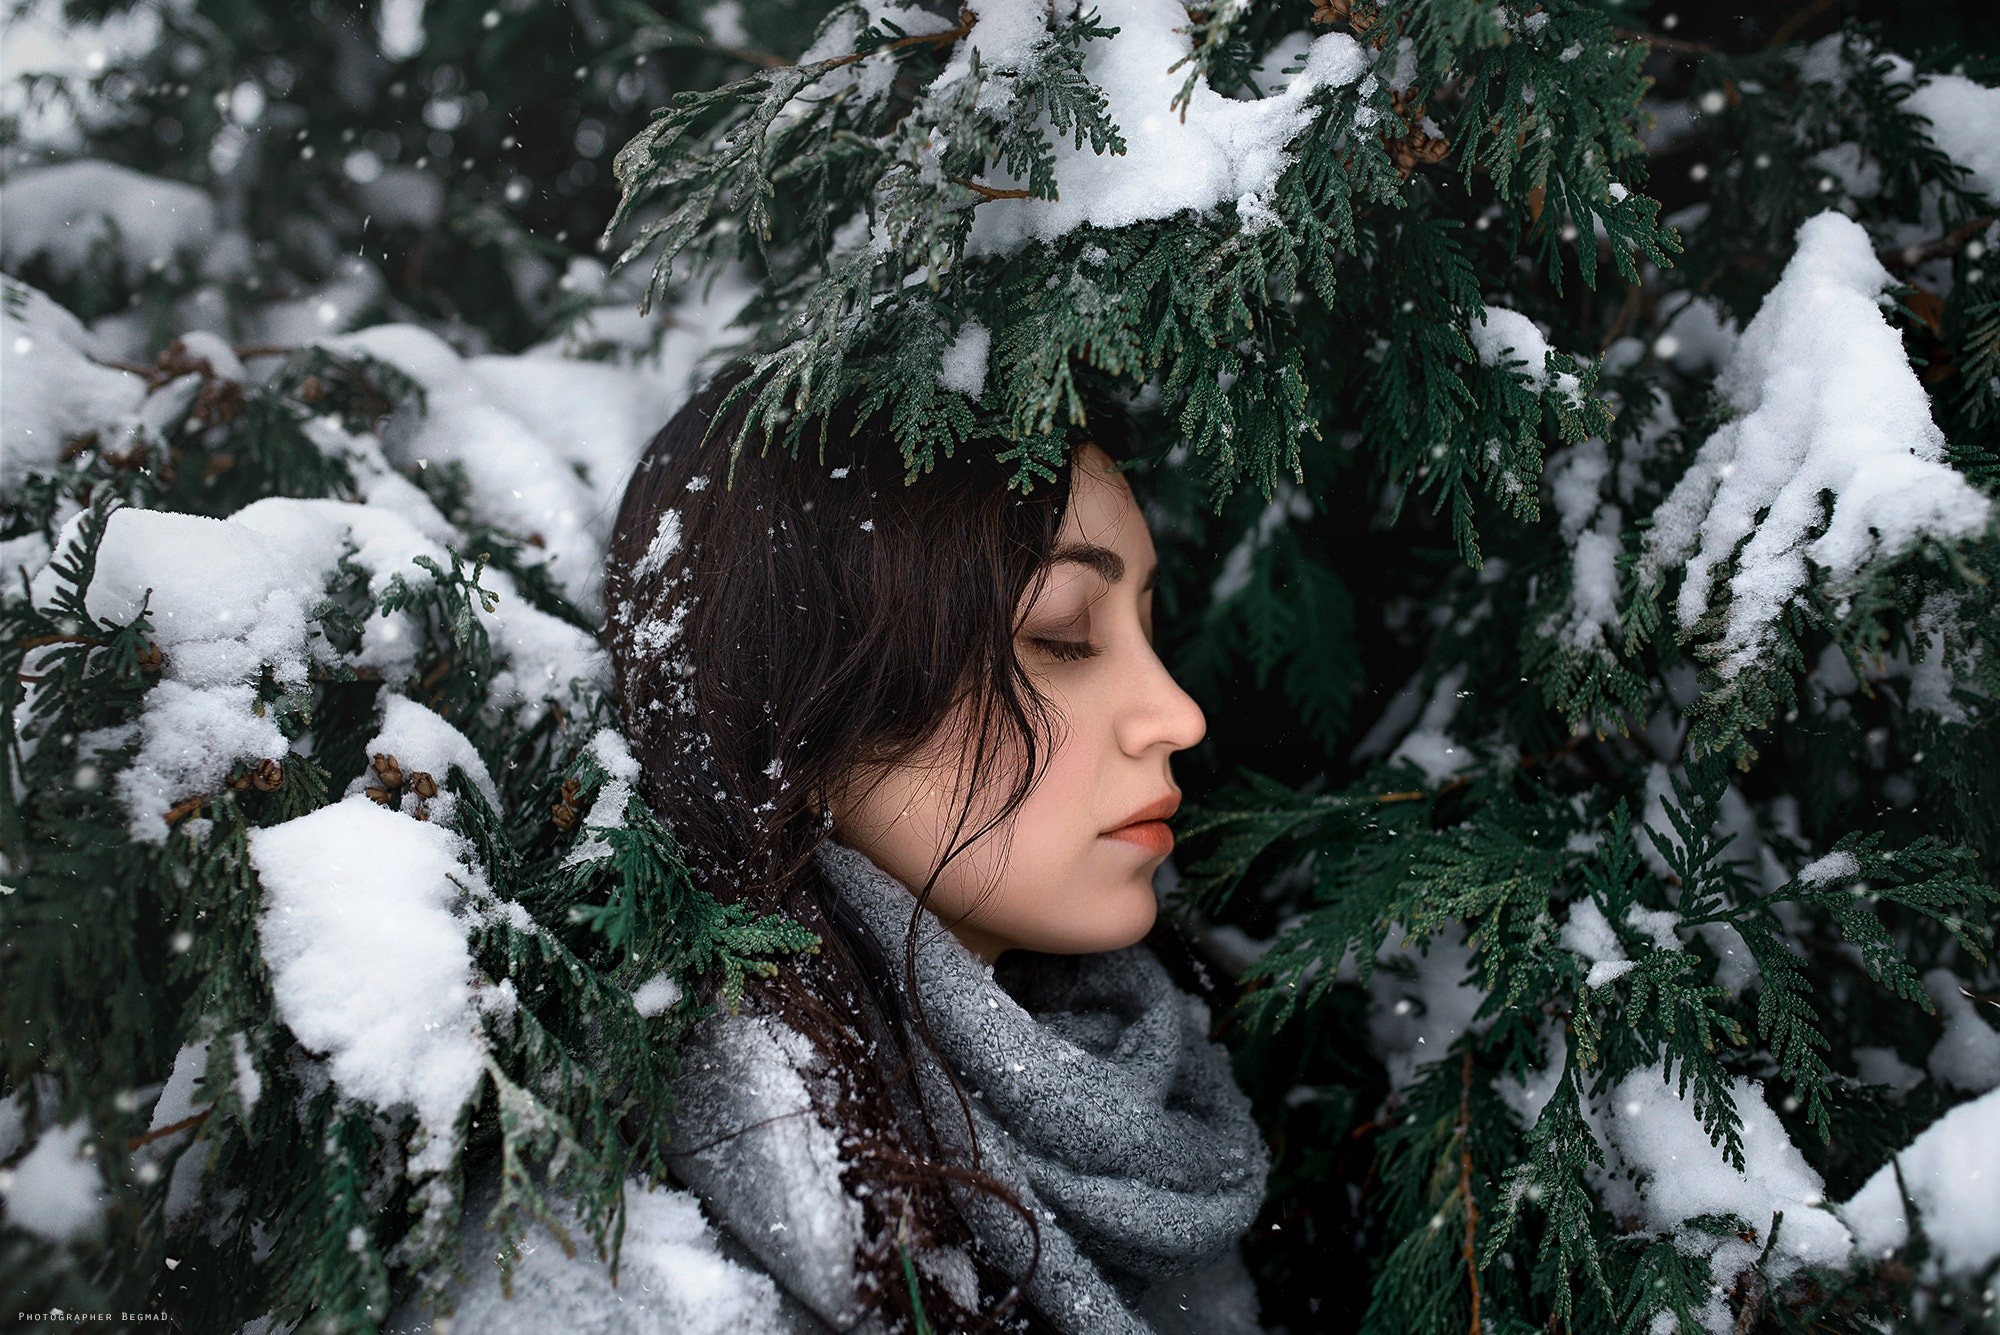 Dima Begma Snow Winter Cold Trees Outdoors Women Outdoors Face Closed Eyes Profile Model Women